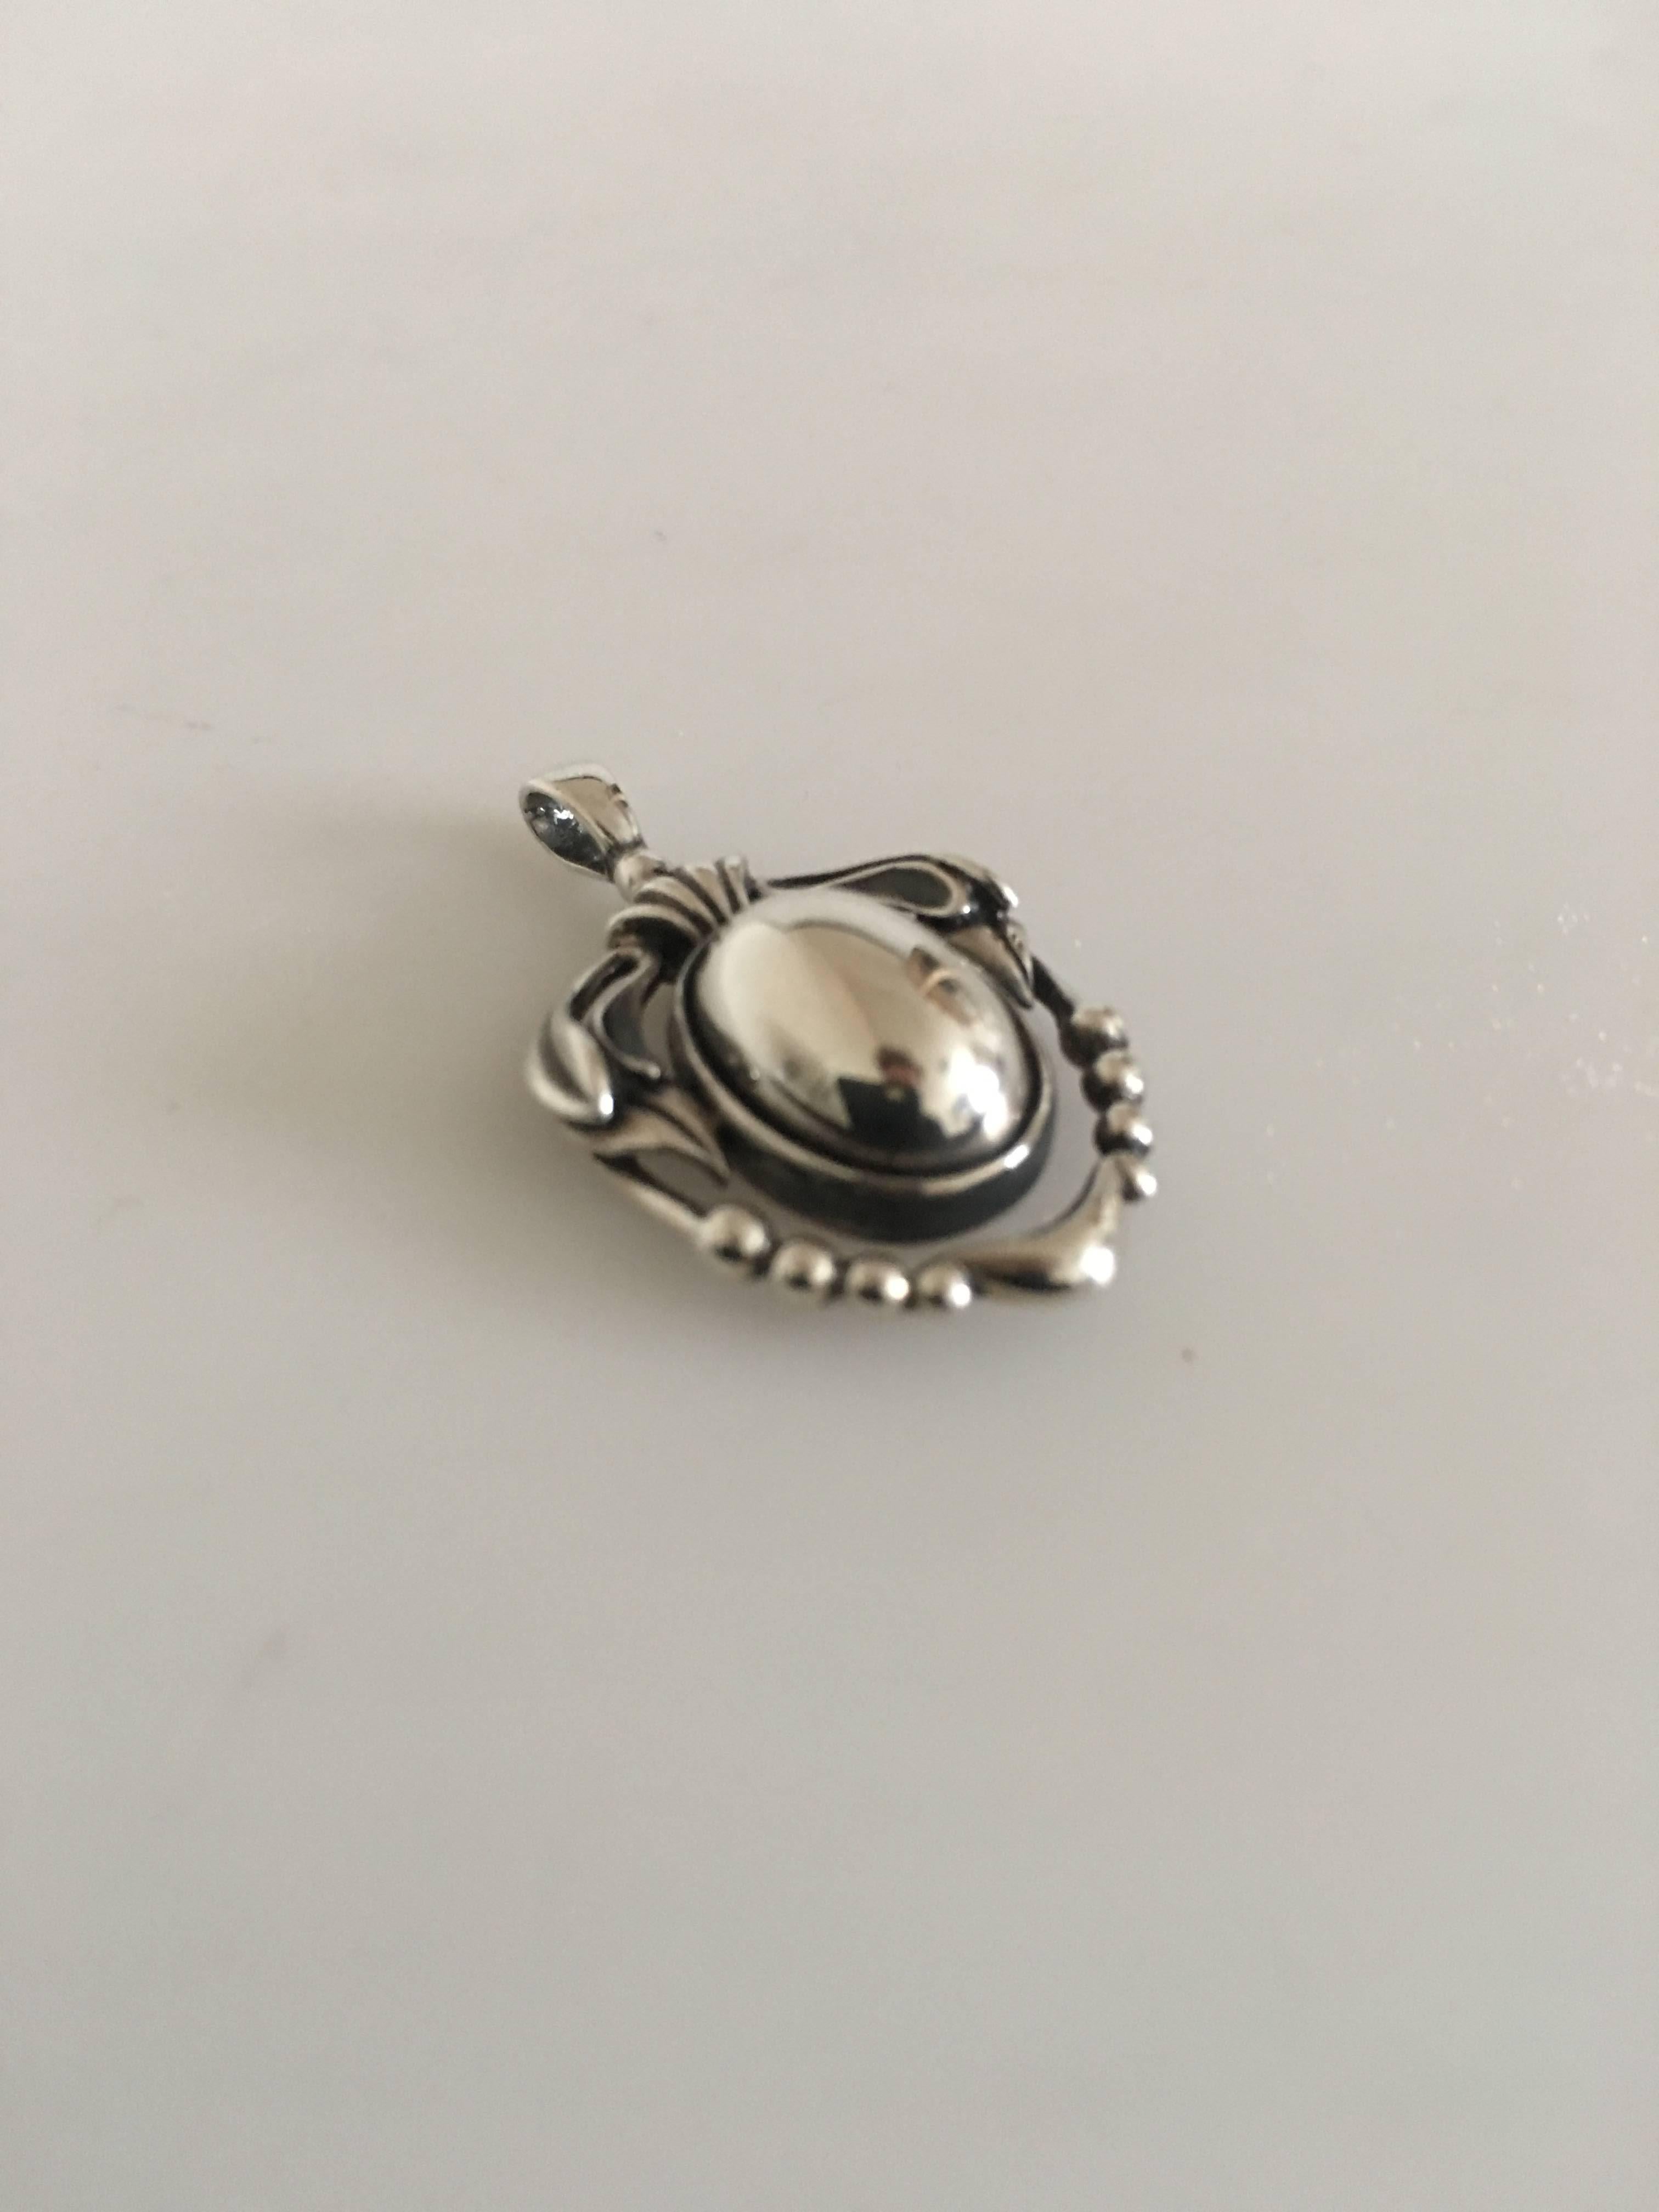 Georg Jensen sterling silver 2014 annual pendant with silver stone. Measures: 3 cm (1 3/16